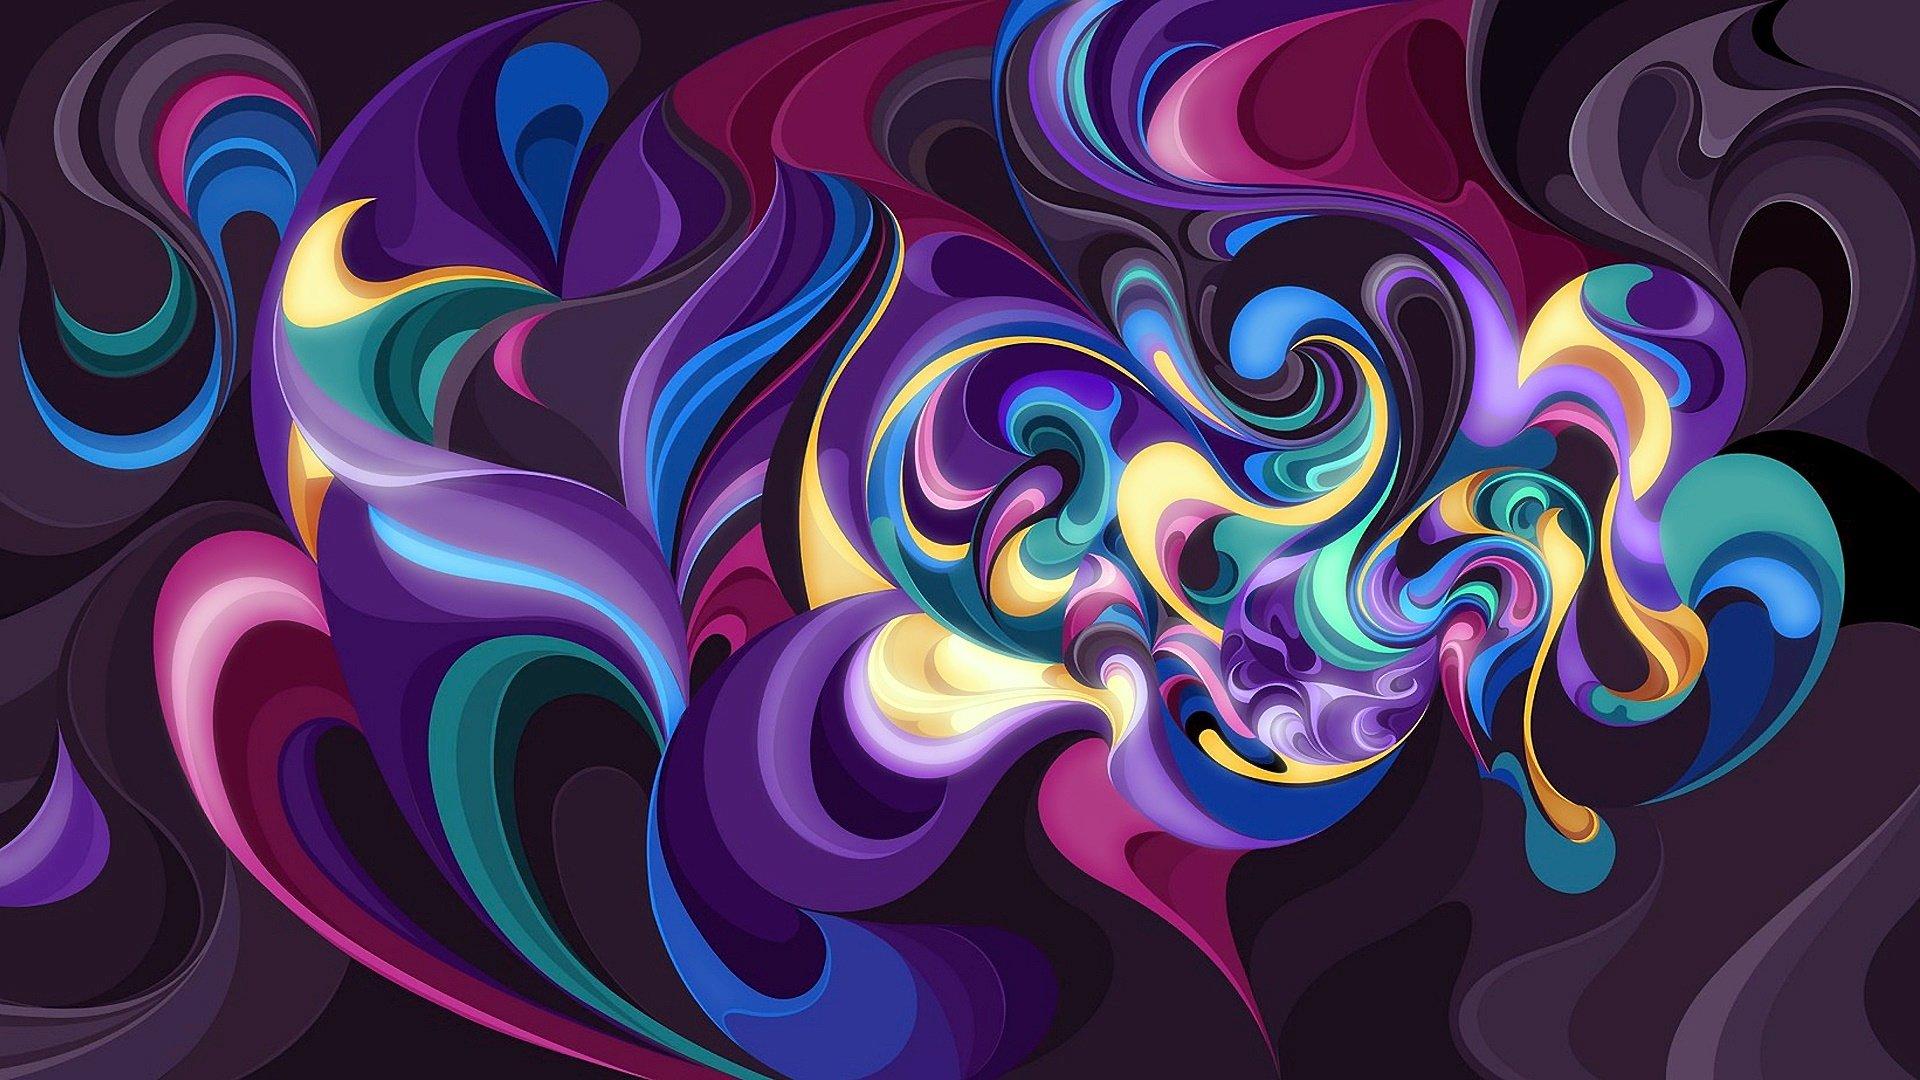 Colorful Abstract Design HD Wallpaper. Background Imagex1080